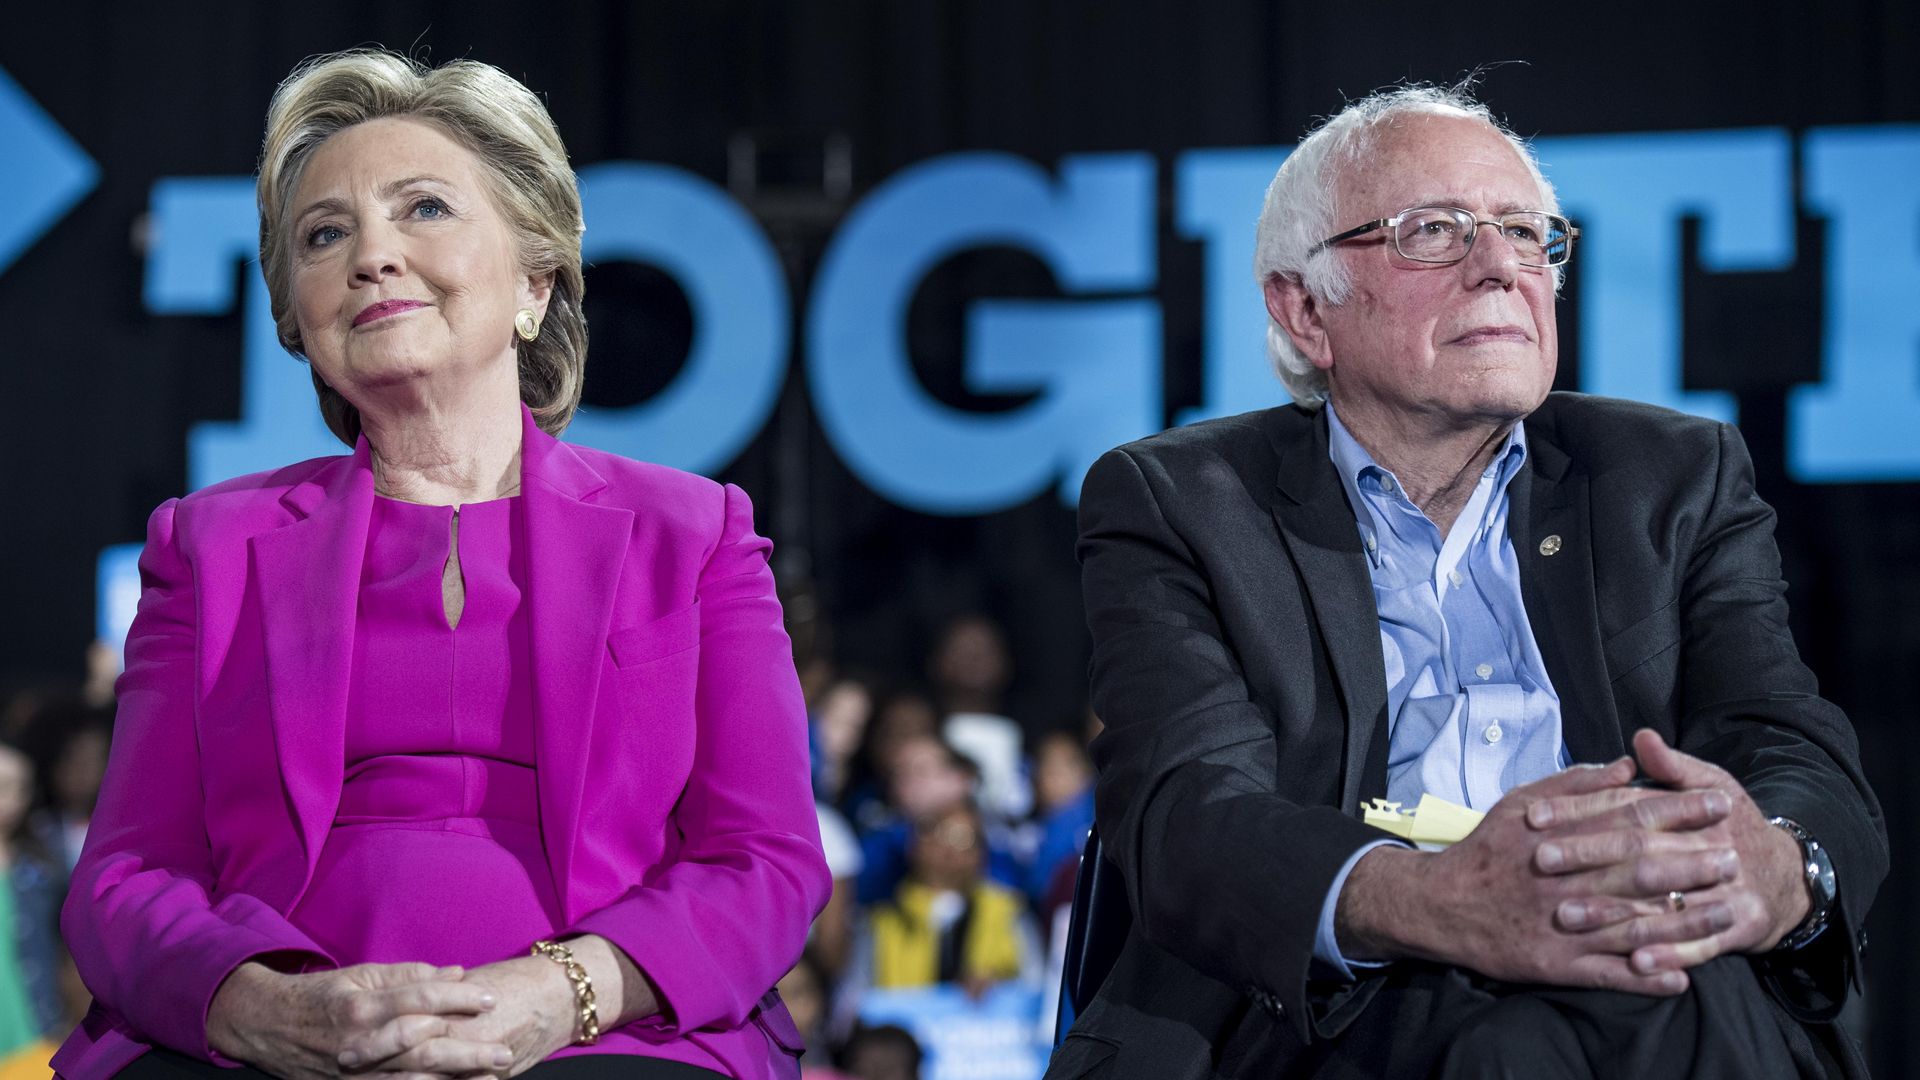 Former Sec. of State Hillary Clinton and Sen. Bernie Sanders